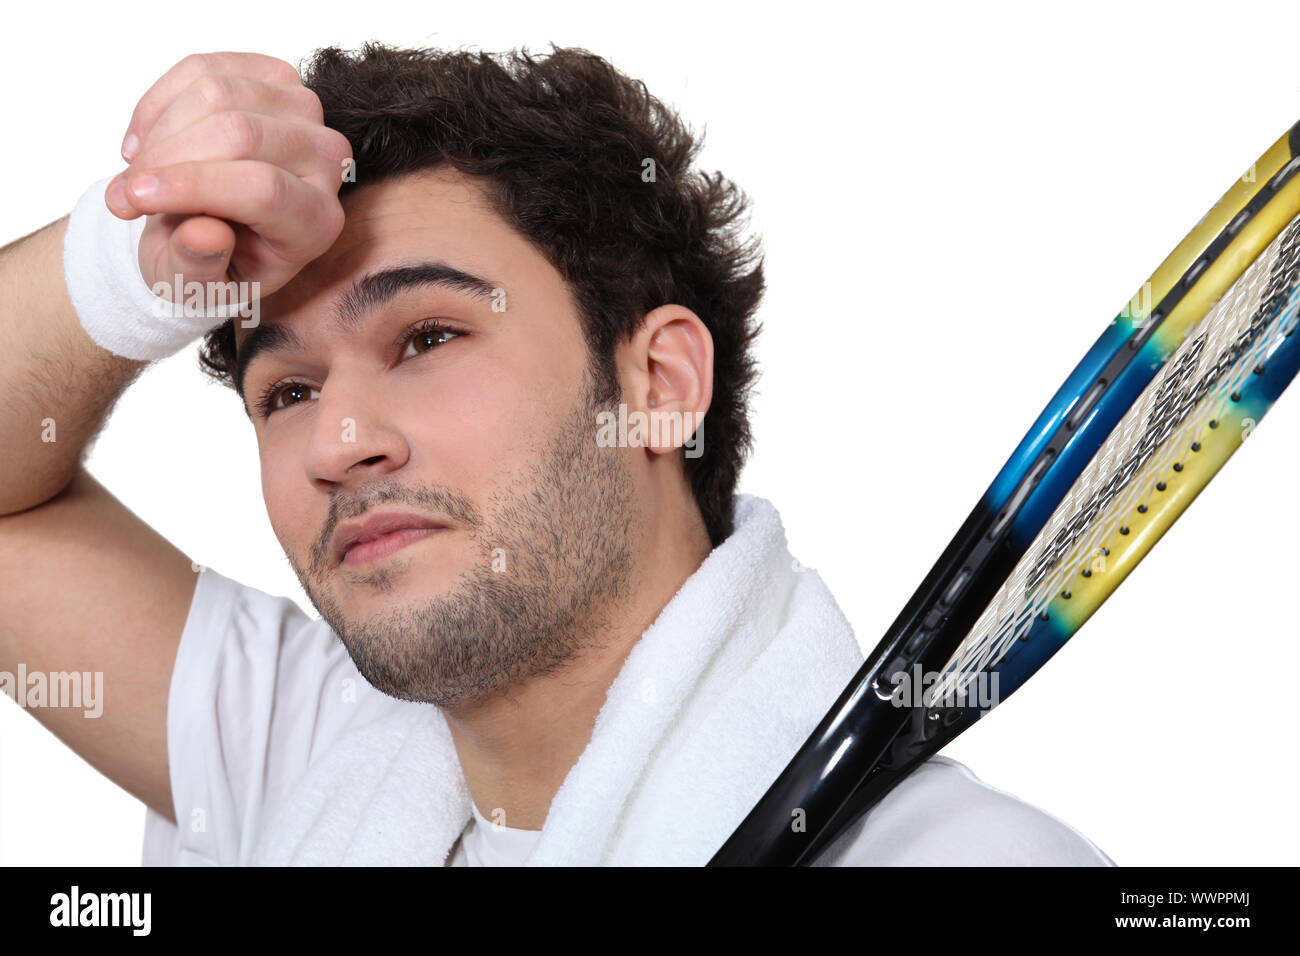 Wiping Sweat Off Brow Stock Photos & Wiping Sweat Off Brow Stock ...